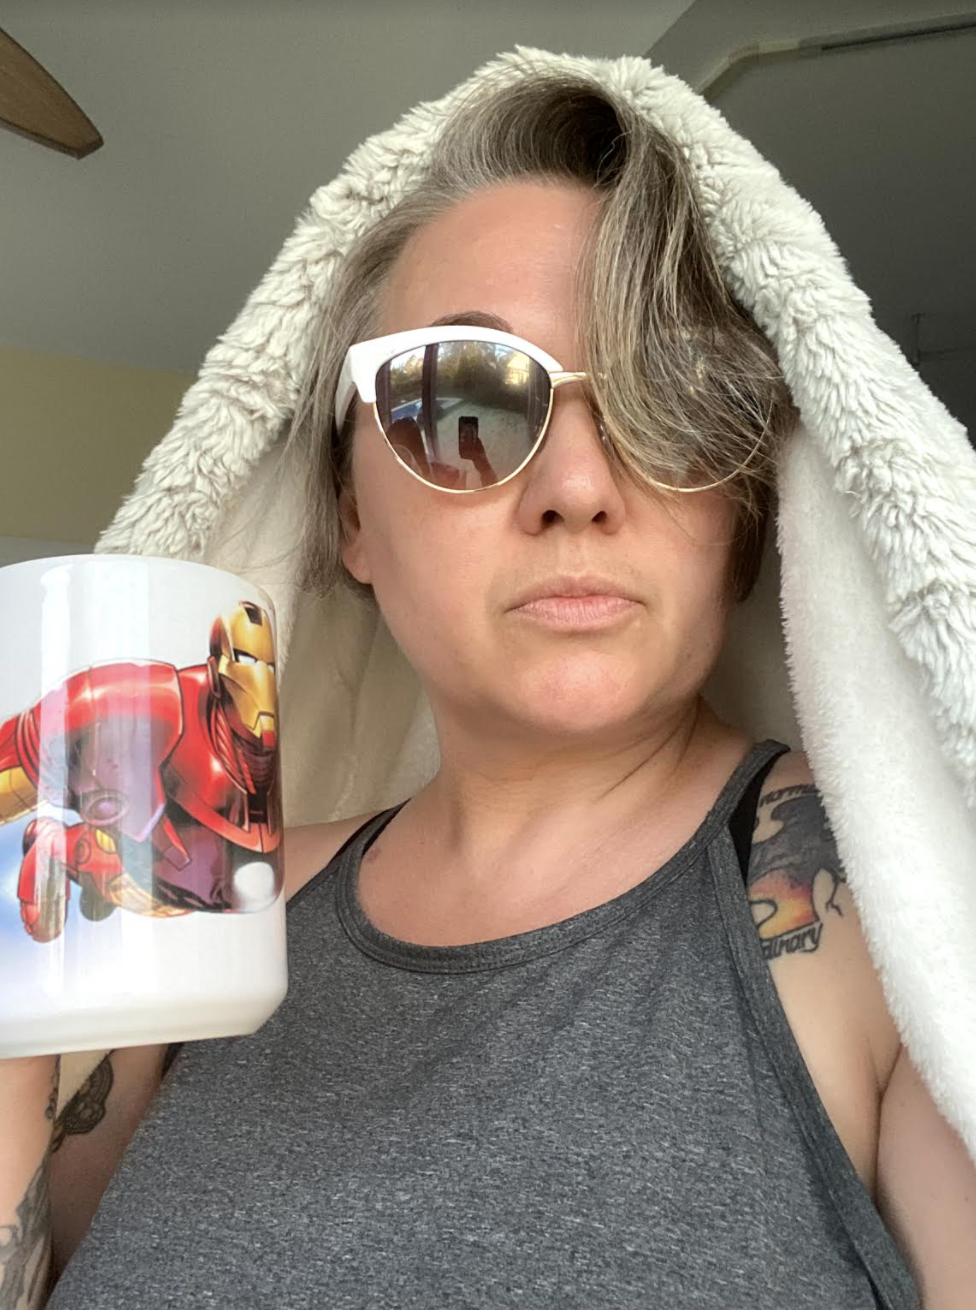 Cayce wearing sunglasses and a blanket over her head while holding a coffee mug with Iron Man on it